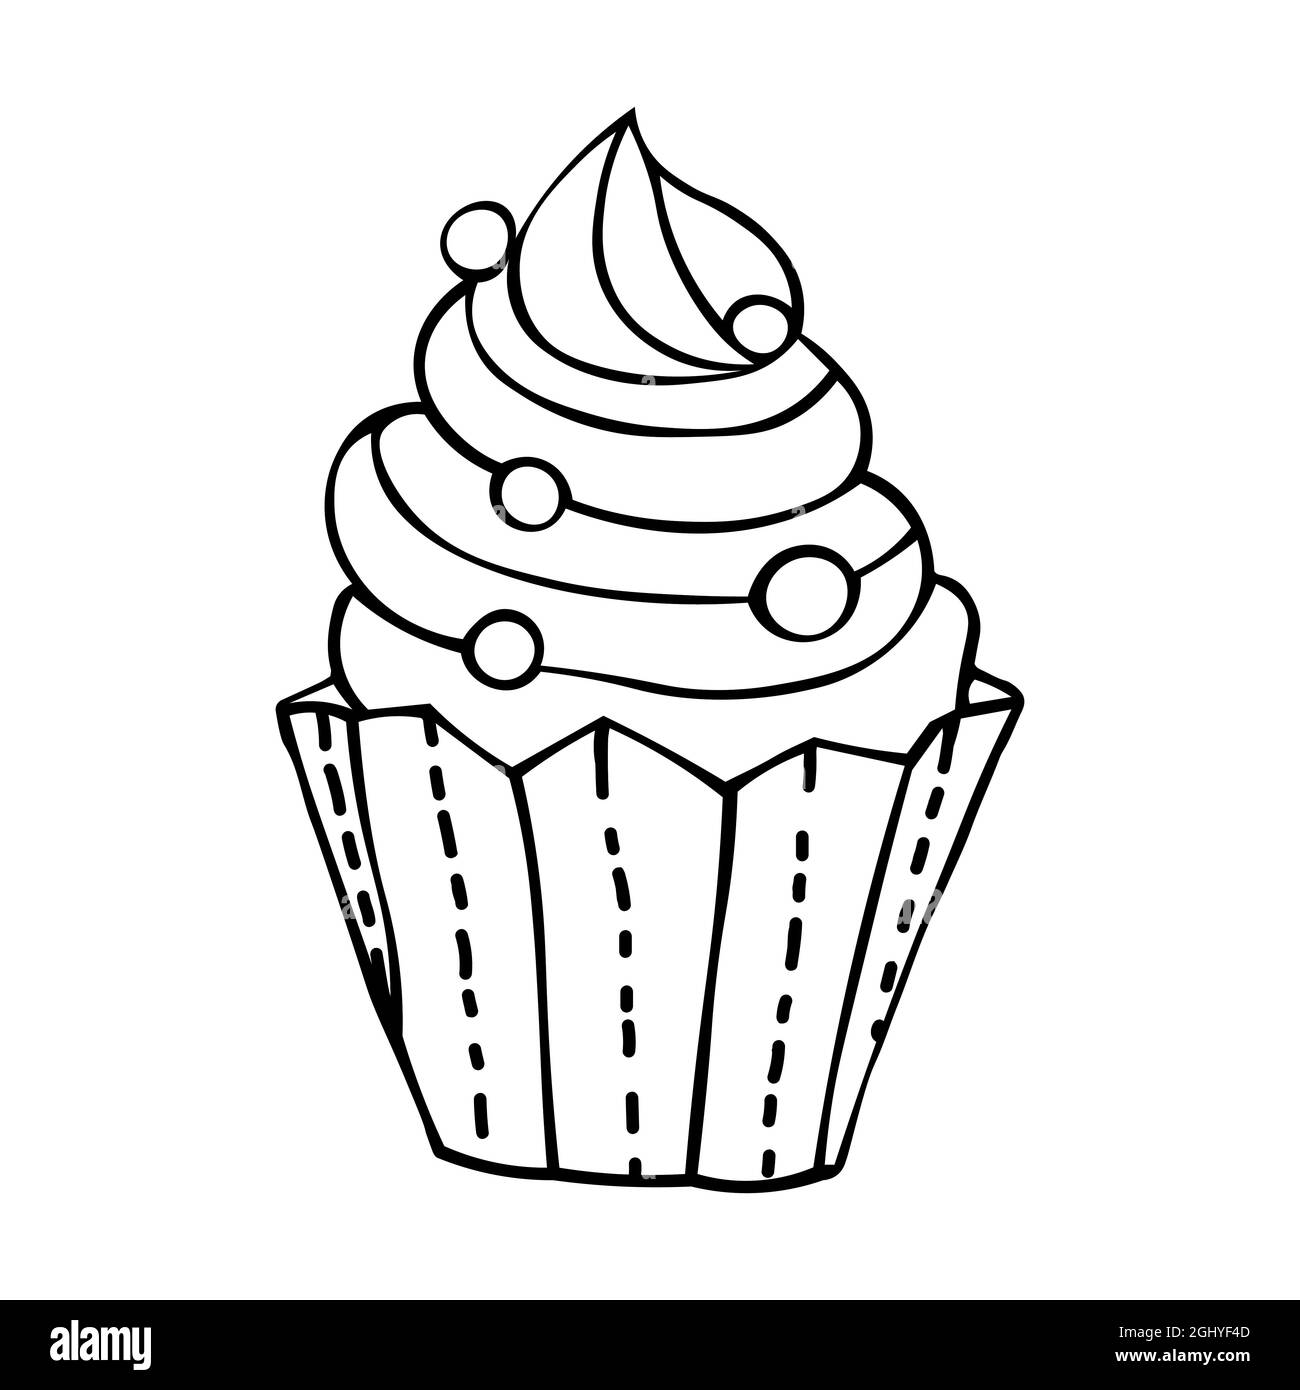 For greeting cards, posters, labels and designs recipes, food design, bakery, pastry shops, cafe. Vector illustration of muffin with cream in doodle s Stock Vector